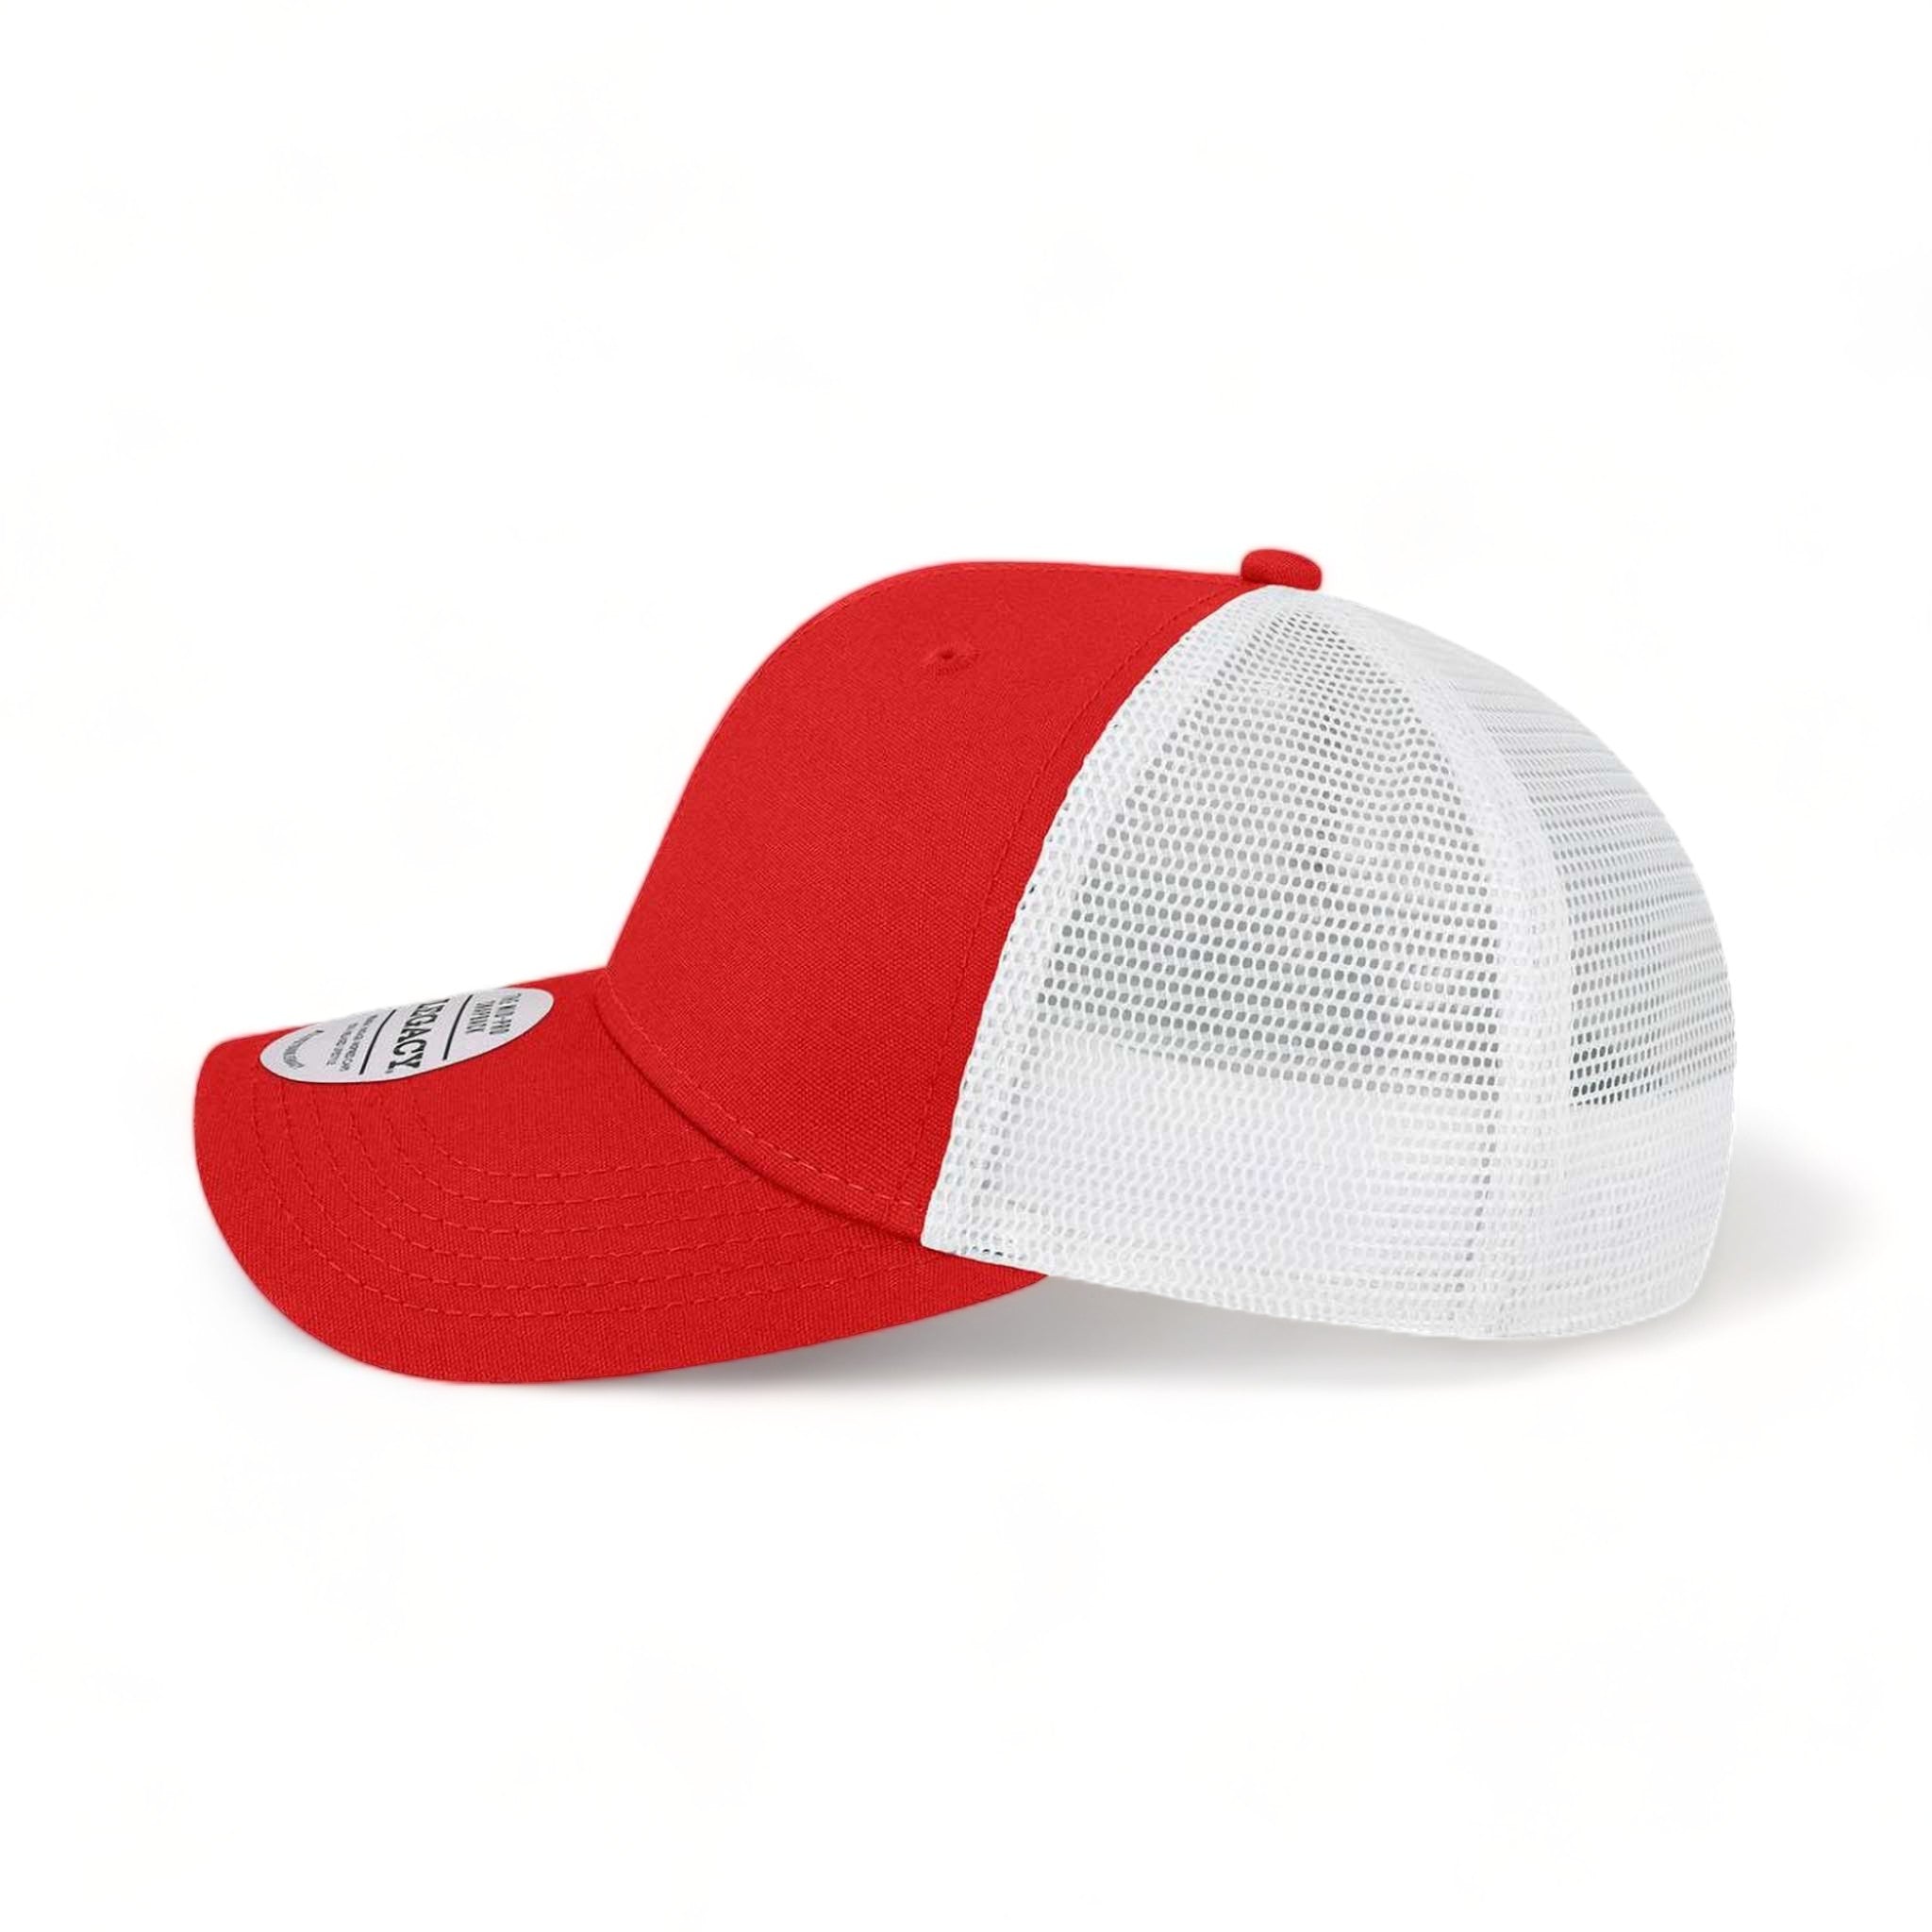 Side view of LEGACY MPS custom hat in scarlet red and white